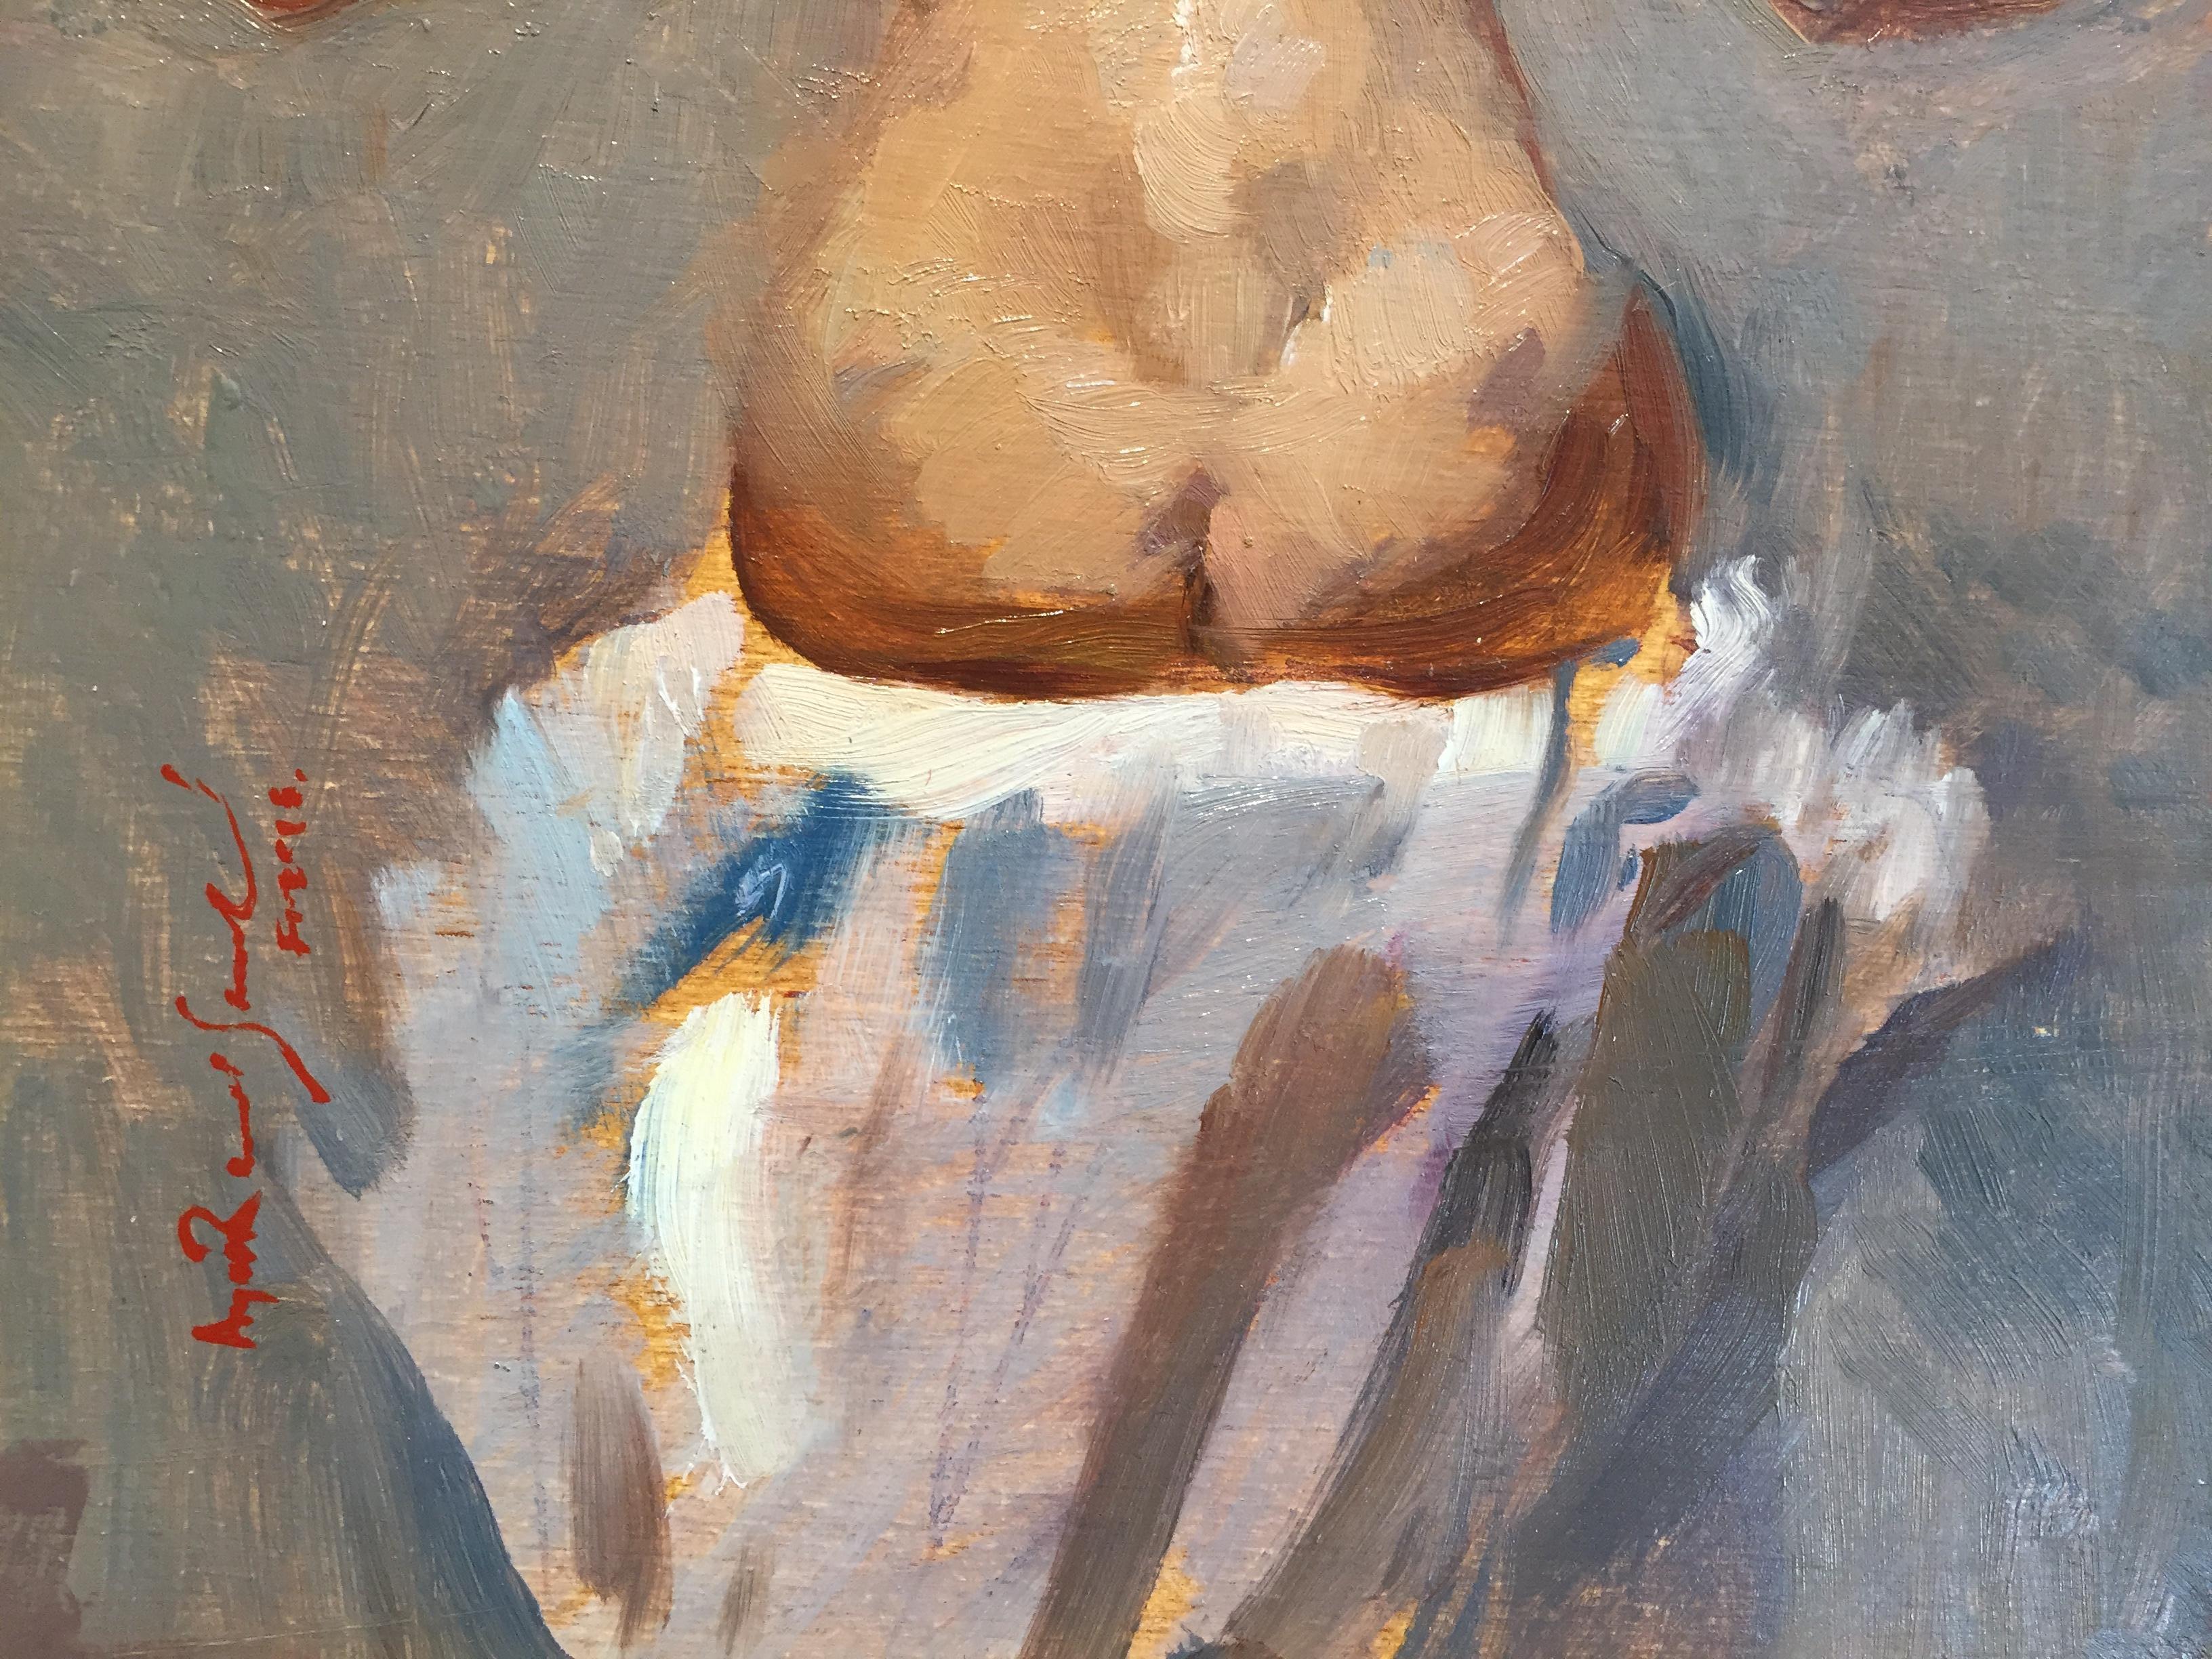 Painted from life, a nude, female figure sits centrally, upon a white linen covered pedestal. The figure's back is revealed, curving sensually and naturally, hair pulled up in a bun to accentuate her form. Her arms reach out to the sides, connoting